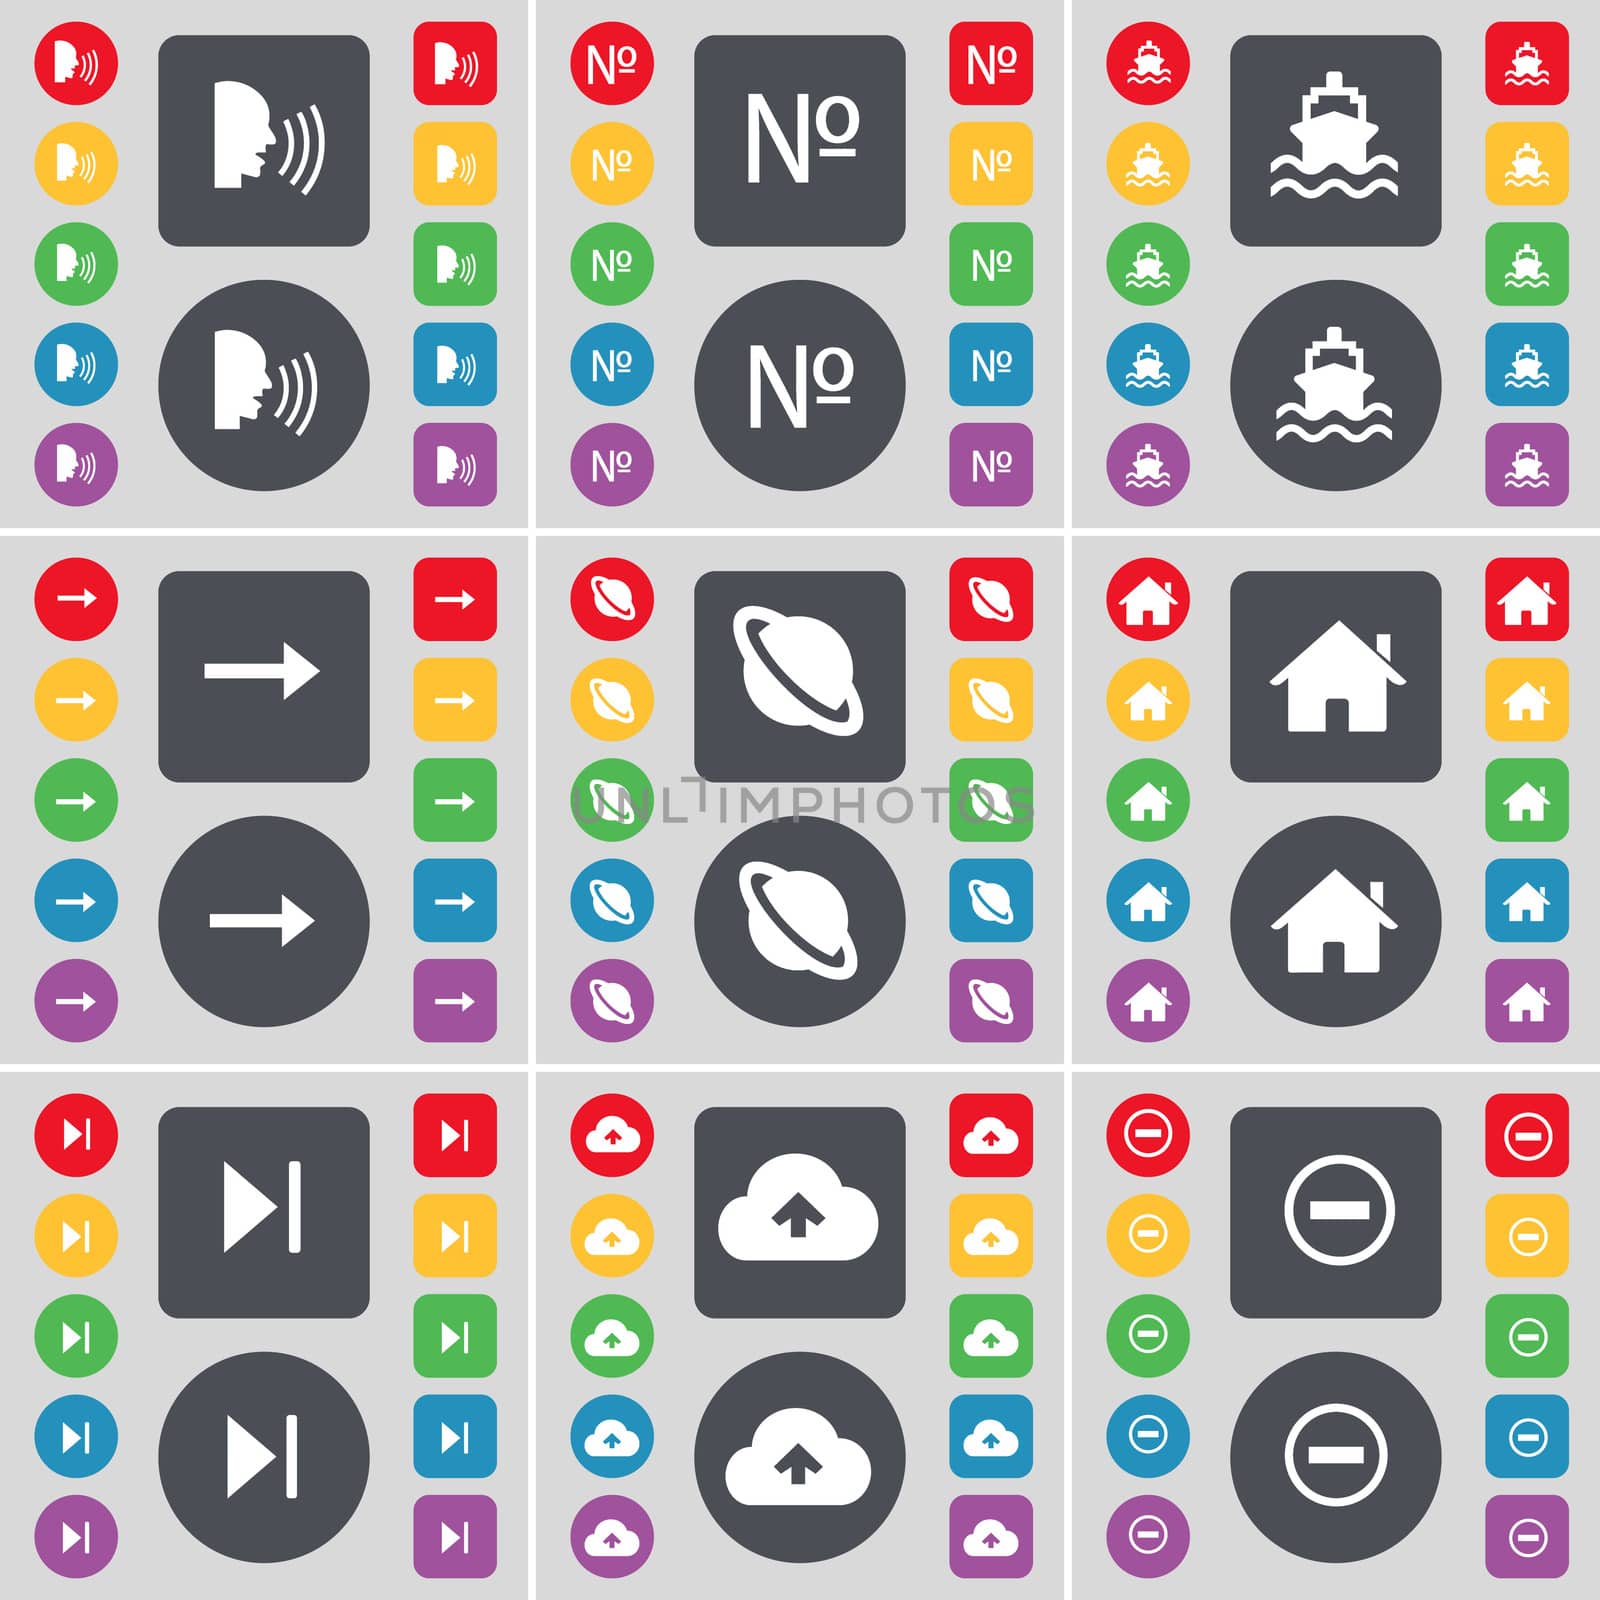 Talk, Number, Ship, Arrow right, Planet, House, Media skip, Cloud, Minus icon symbol. A large set of flat, colored buttons for your design. illustration